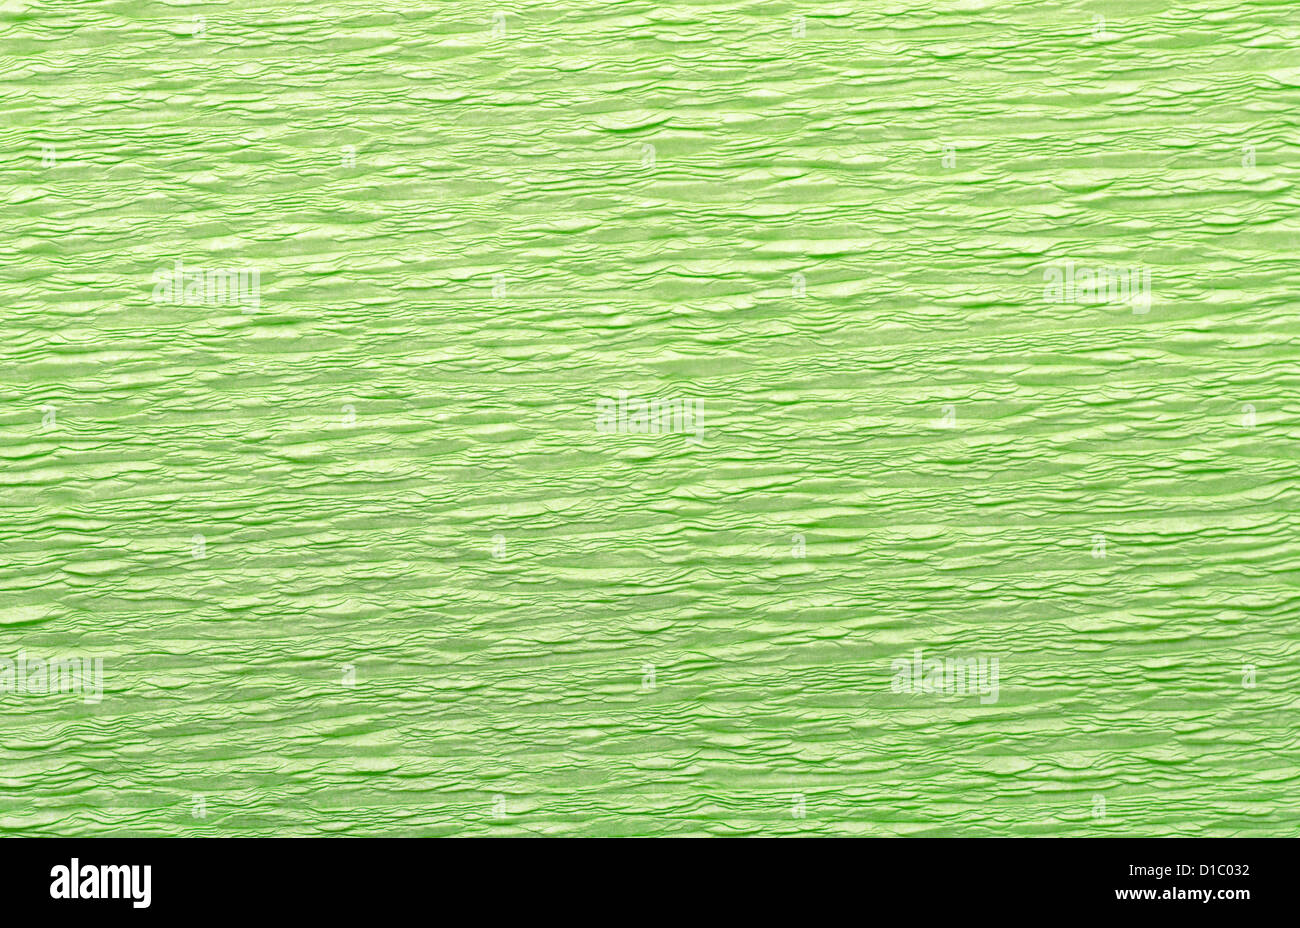 Green wrinkled crepe paper background Stock Photo